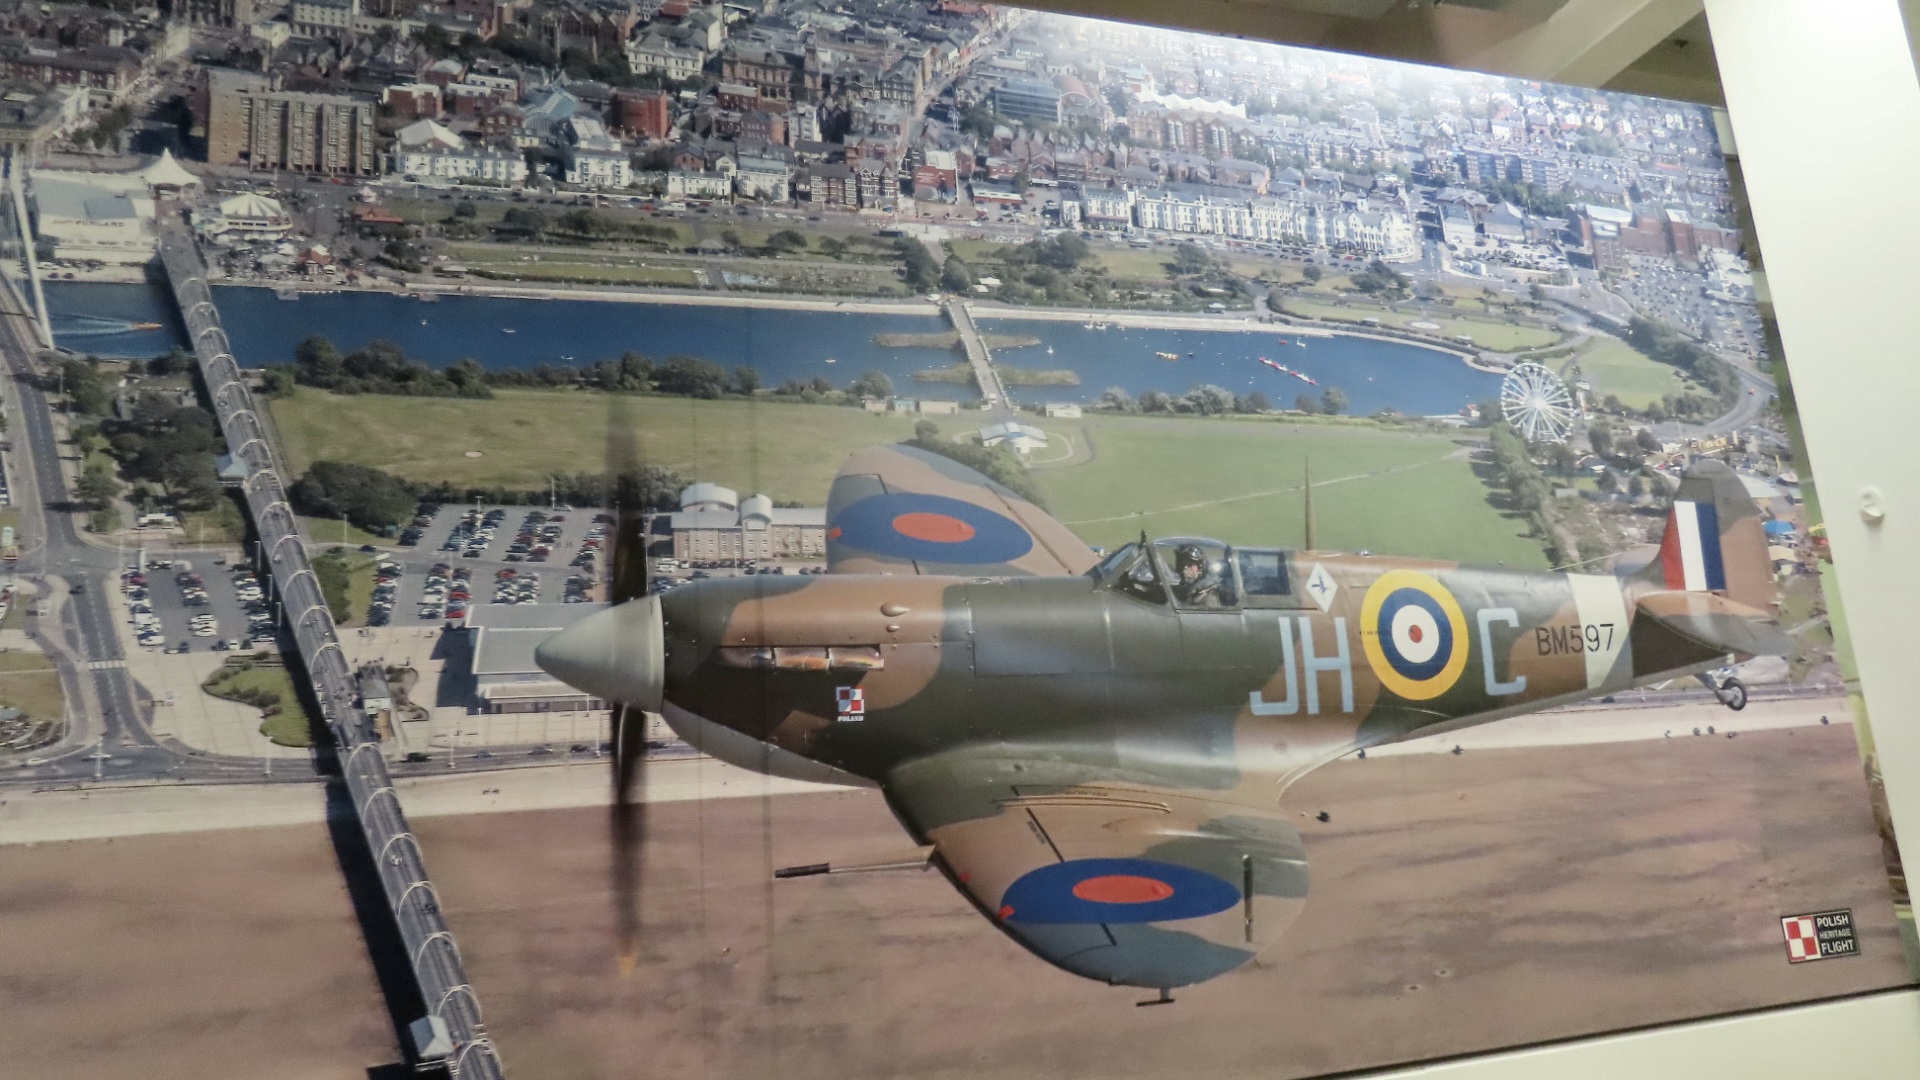 Polish air crews who fought alongside Great Britain against Nazi Germany during World War II are being celebrated in a special new exhibition at The Atkinson in Southport